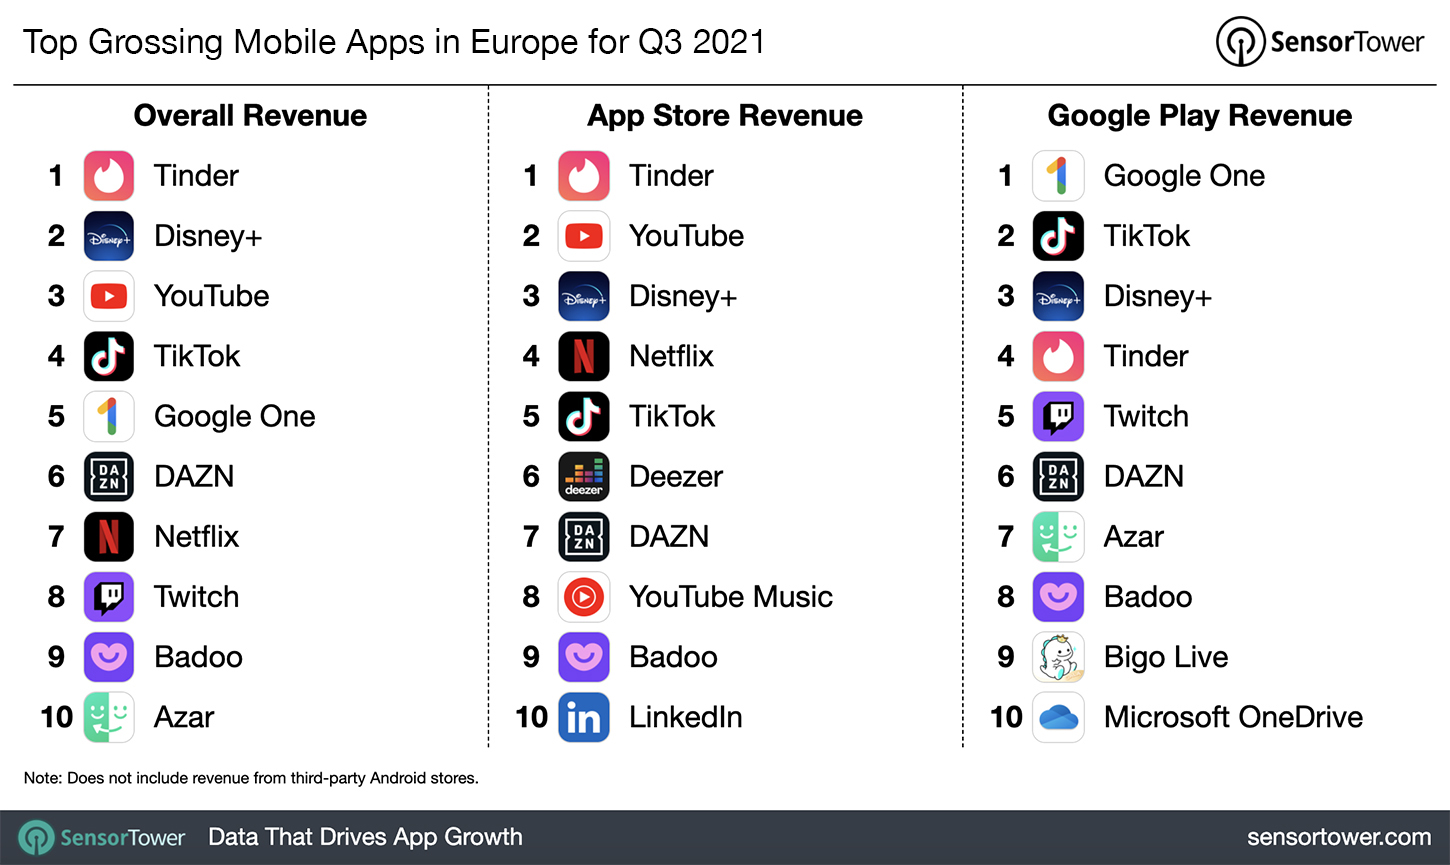 Top Grossing Mobile Apps in Europe for Q3 2021 – App Store and Google Play